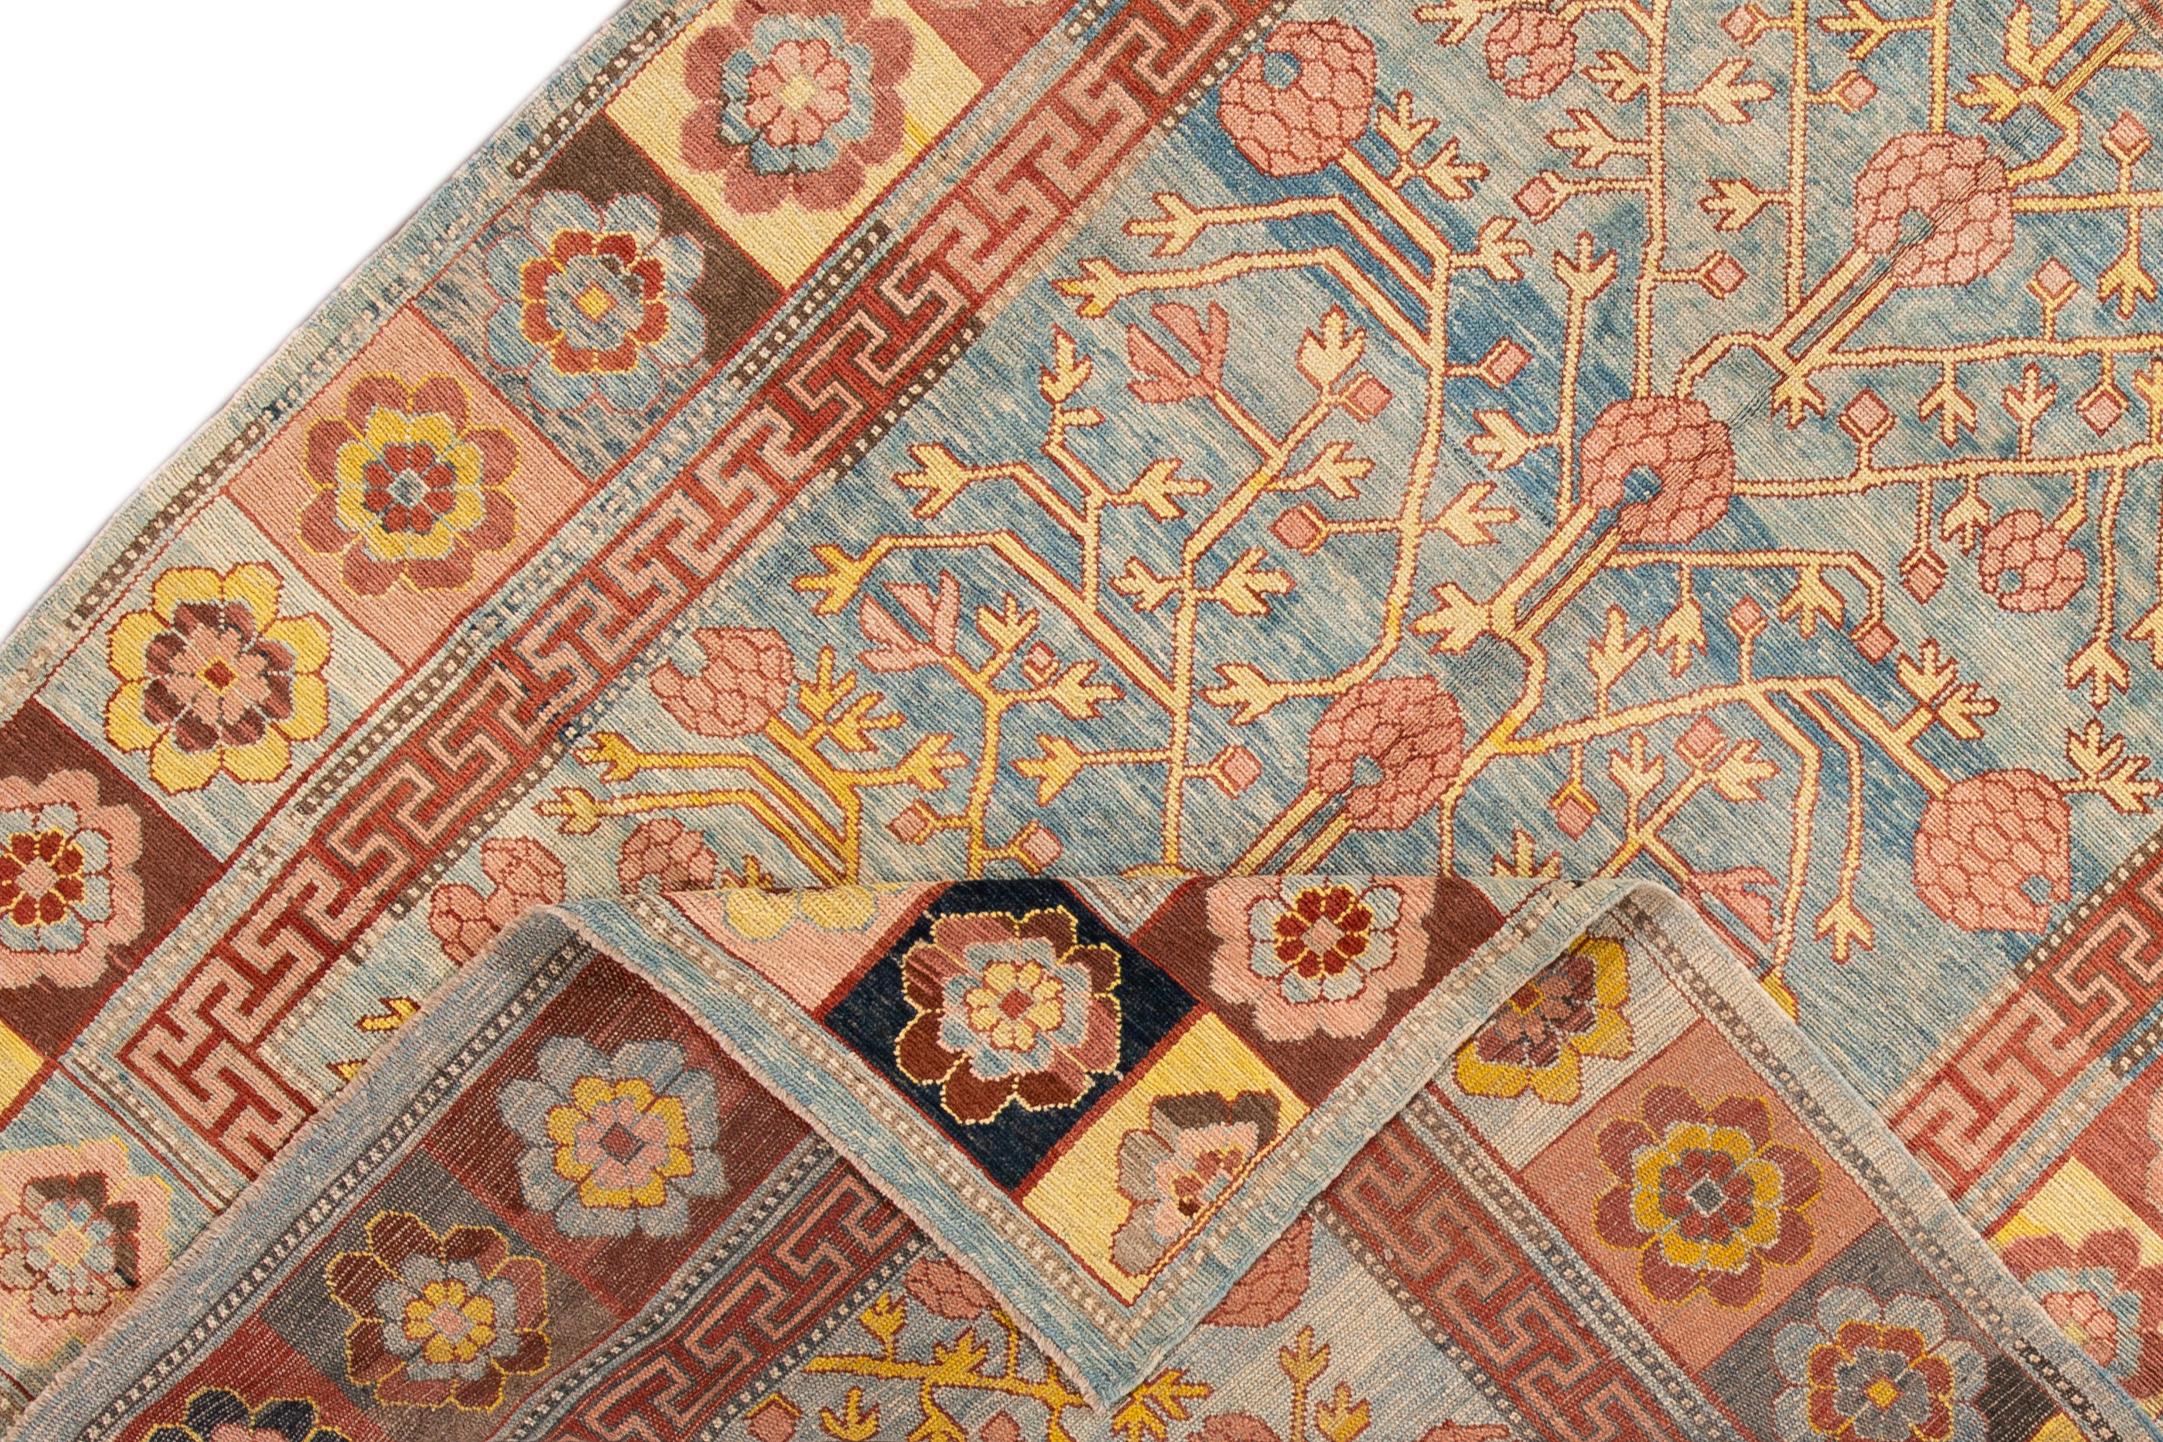 Beautiful Vintage Khotan style hand knotted wool rug with a blue field, and multi-color accents in an all-over geometric floral design.

This rug measures 6' 7